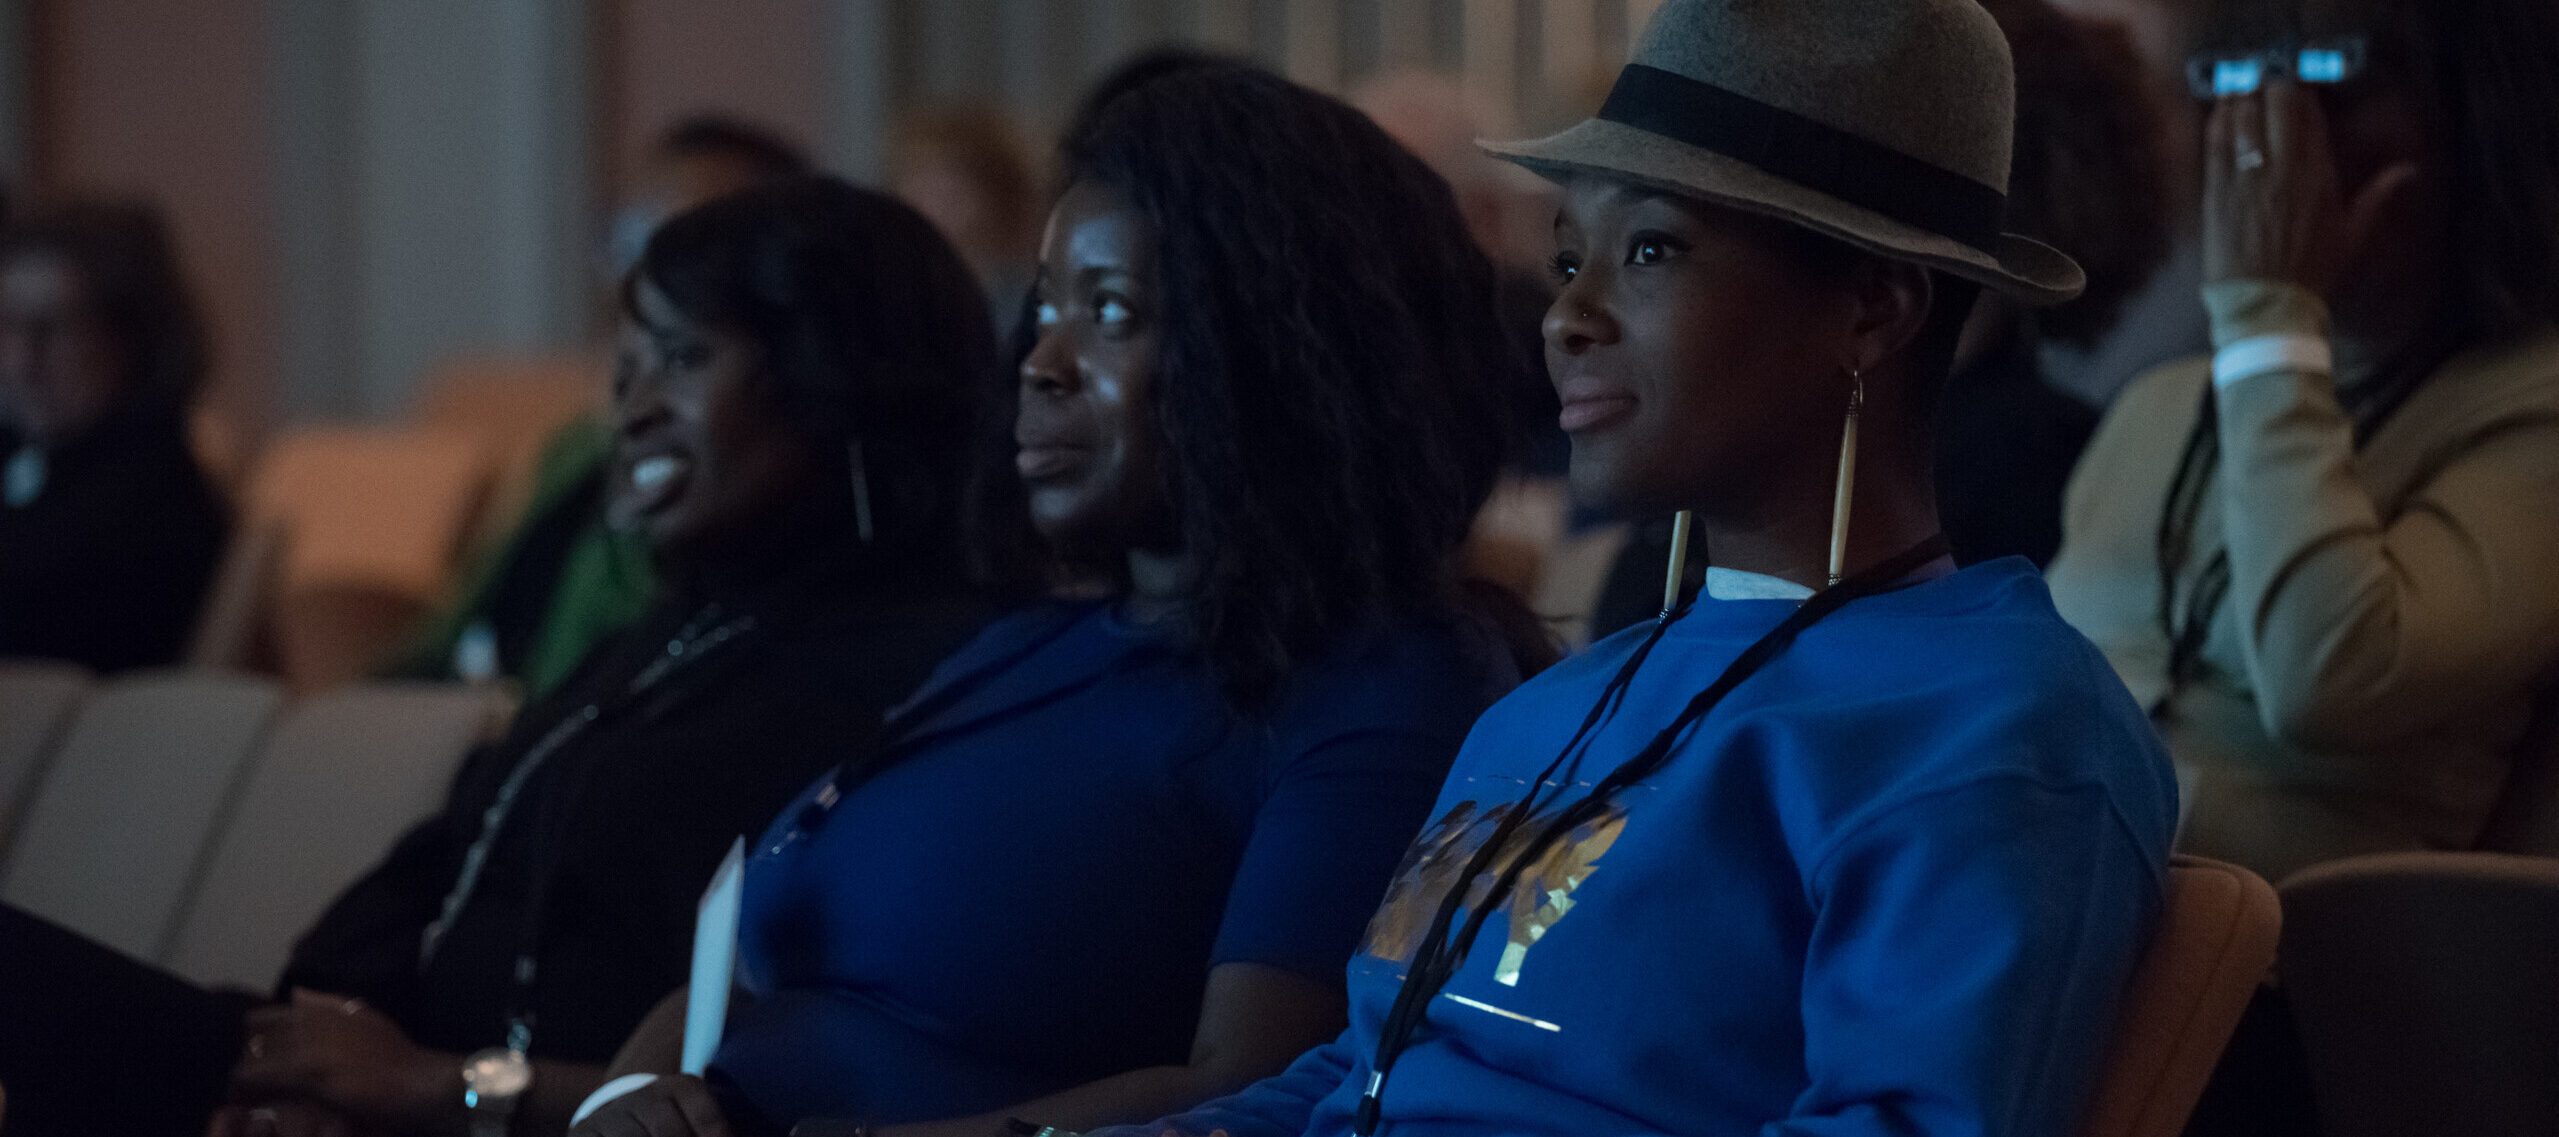 Three dark-skinned women sit in an auditorium with their hands crossed in their laps, intently watching an event.